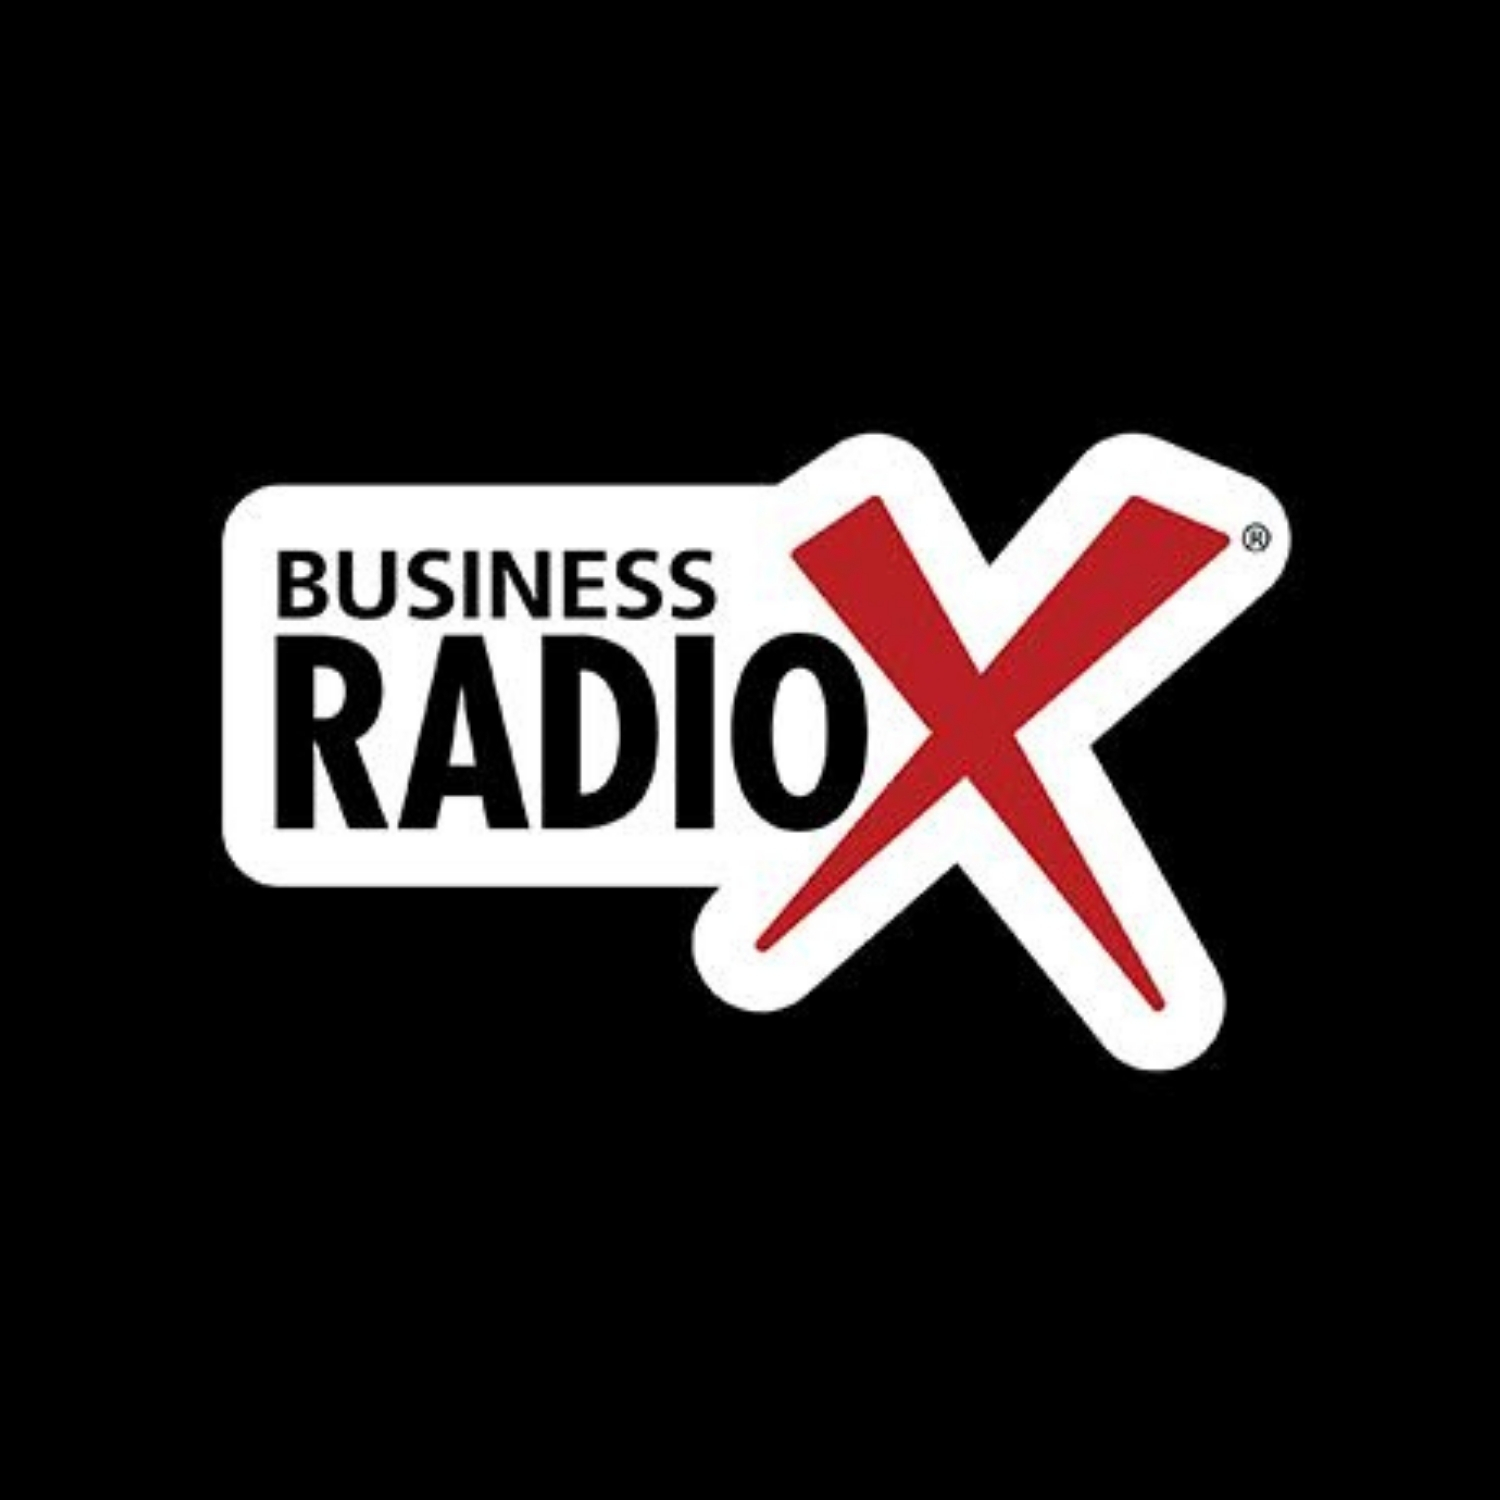 Roy Brostrand and John Pollock with Philly Connection Food Trucks, Madison James with Kind Snacks and Atlanta BeltLine, Ryan Pernice with Table & Main and Osteria Mattone, Mike Rose with Starkey Mortgage – Buckhead Business Radio